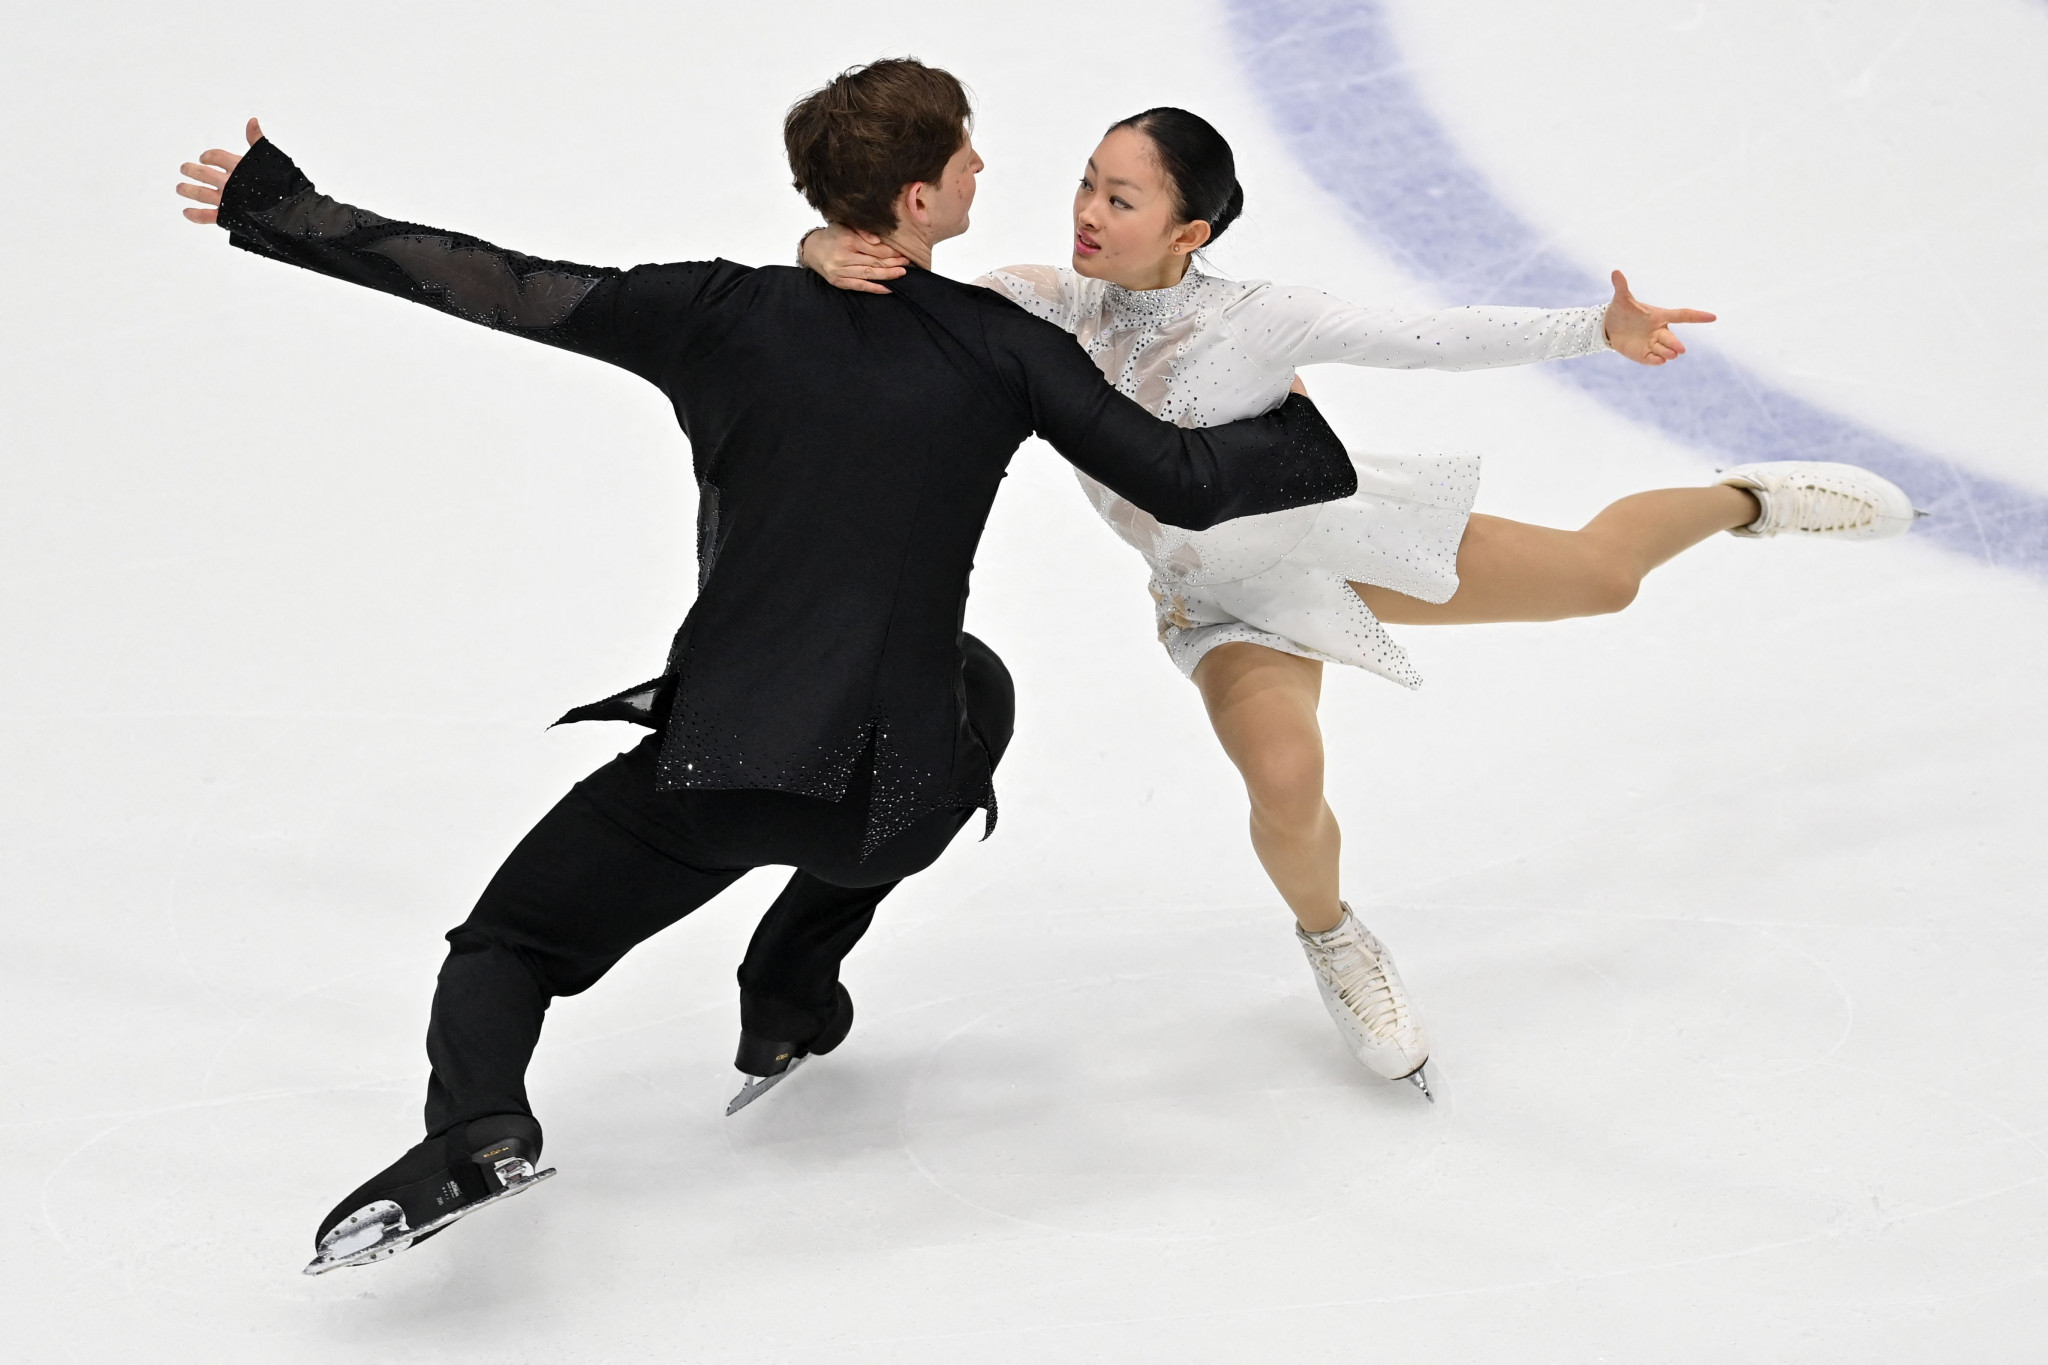 Audrey Lu and Misha Mitrofanov won both the pairs free skate and pairs short programme at the Four Continents Figure Skating Championships ©Getty Images